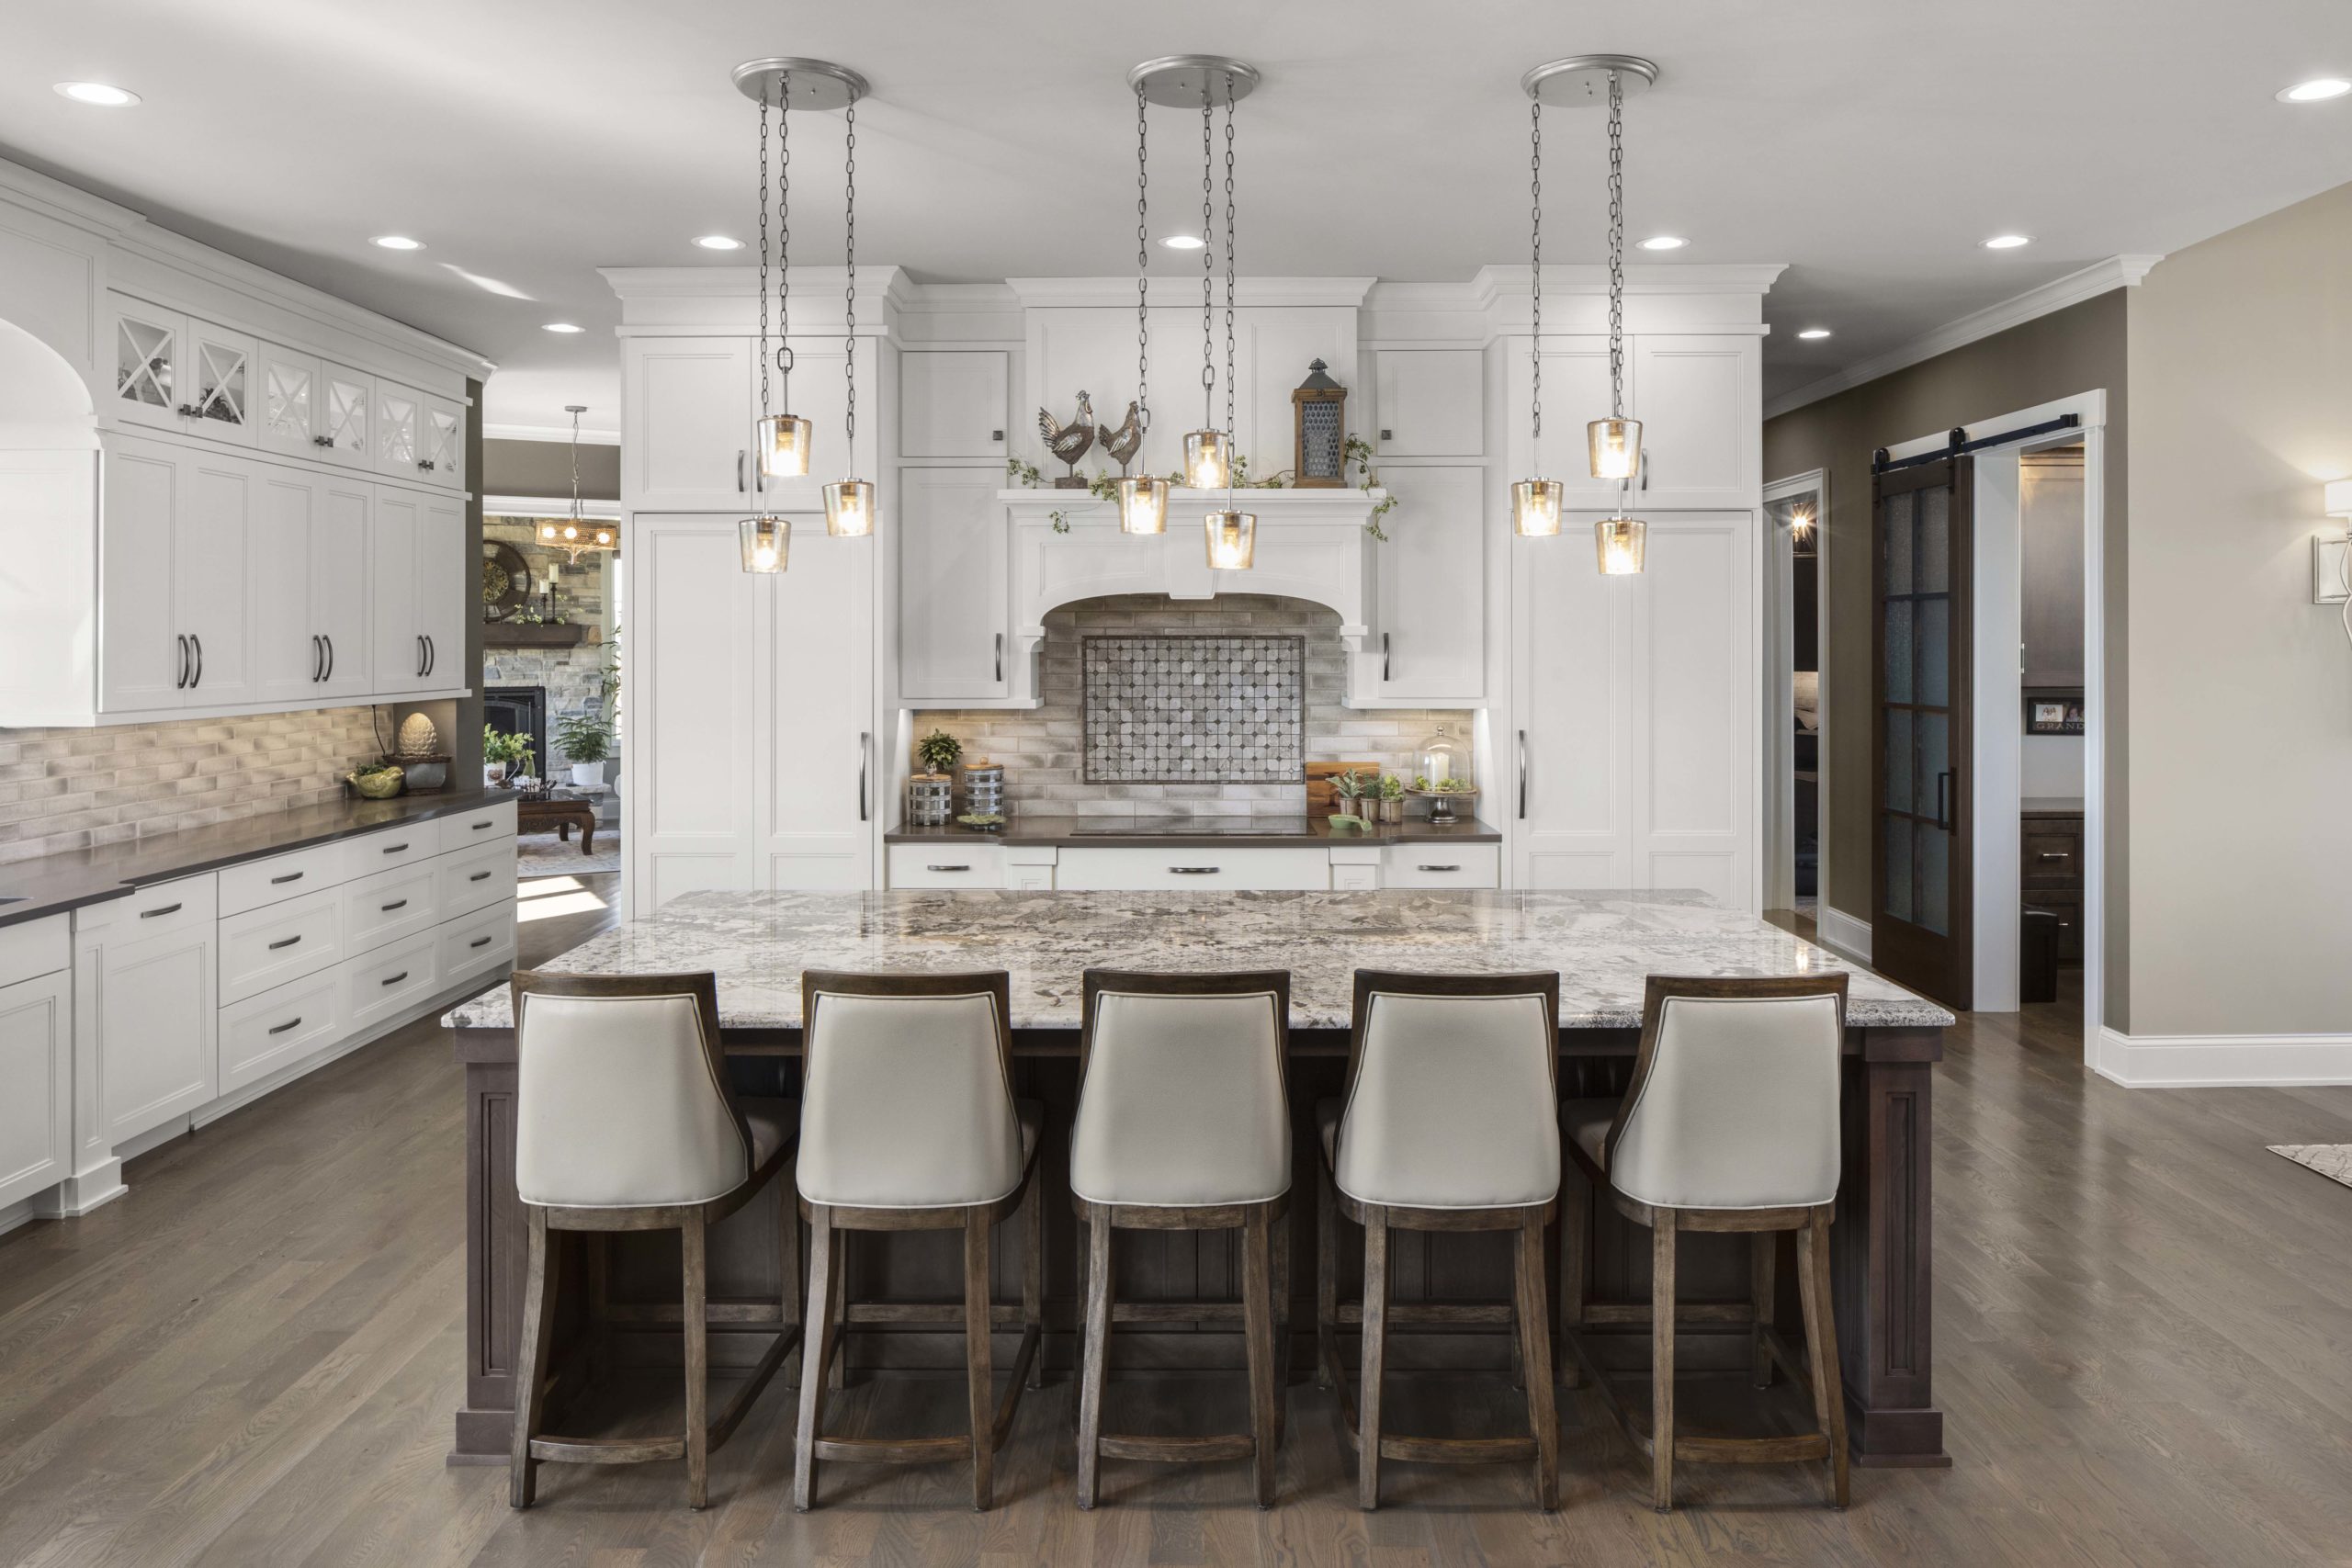 White cabinets in a kitchen with an oversized island and five chairs at the counter